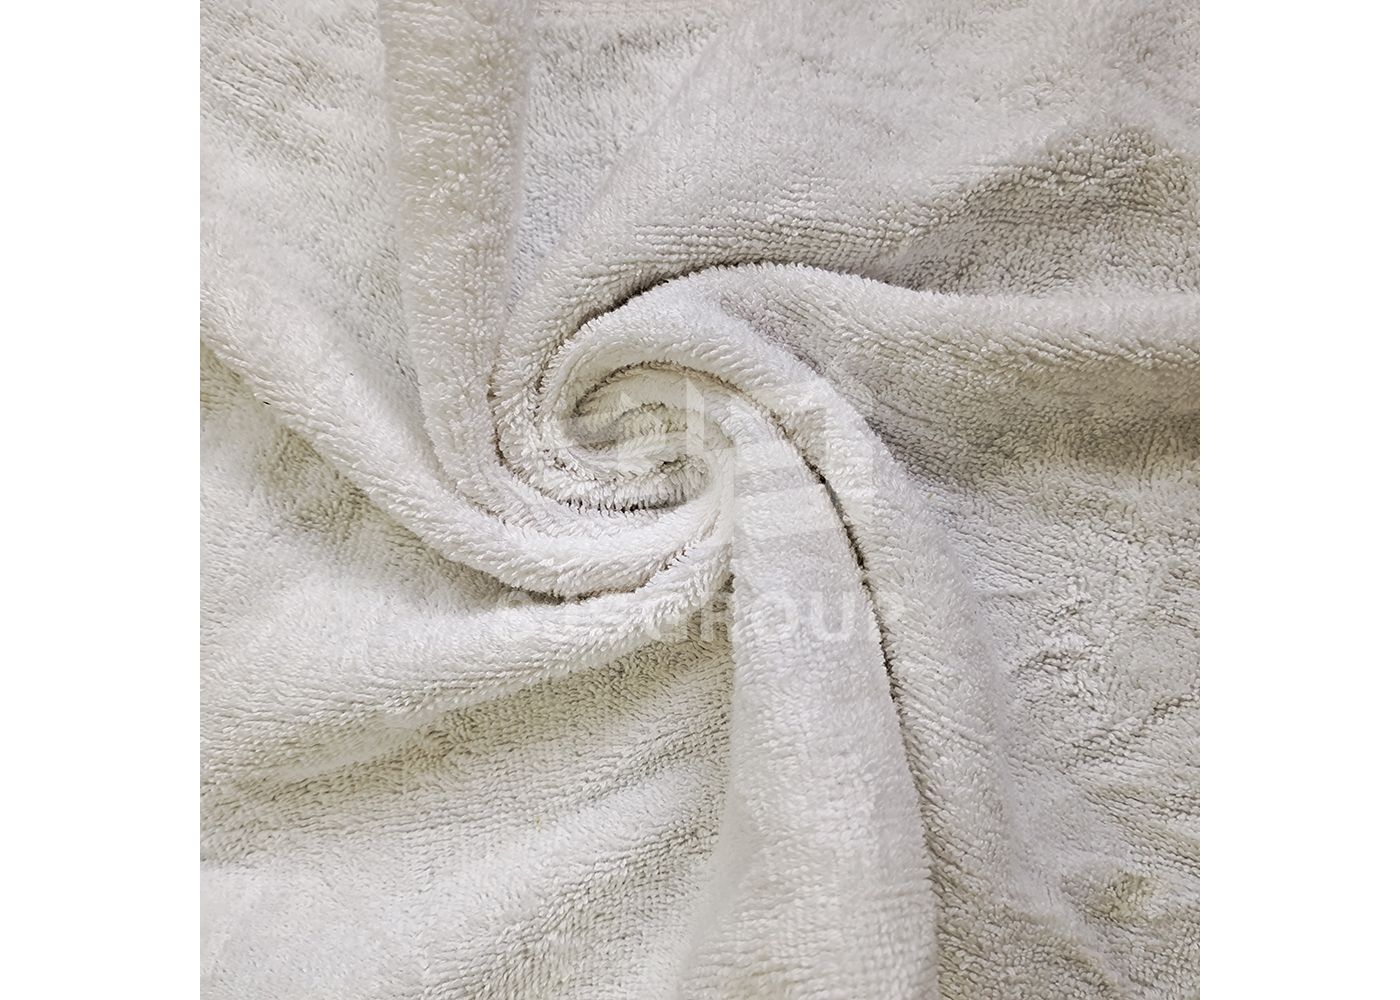 https://www.sjswipingrags.com/upload/allimg/170504/mixed-white-towel-rags-index-03.jpg